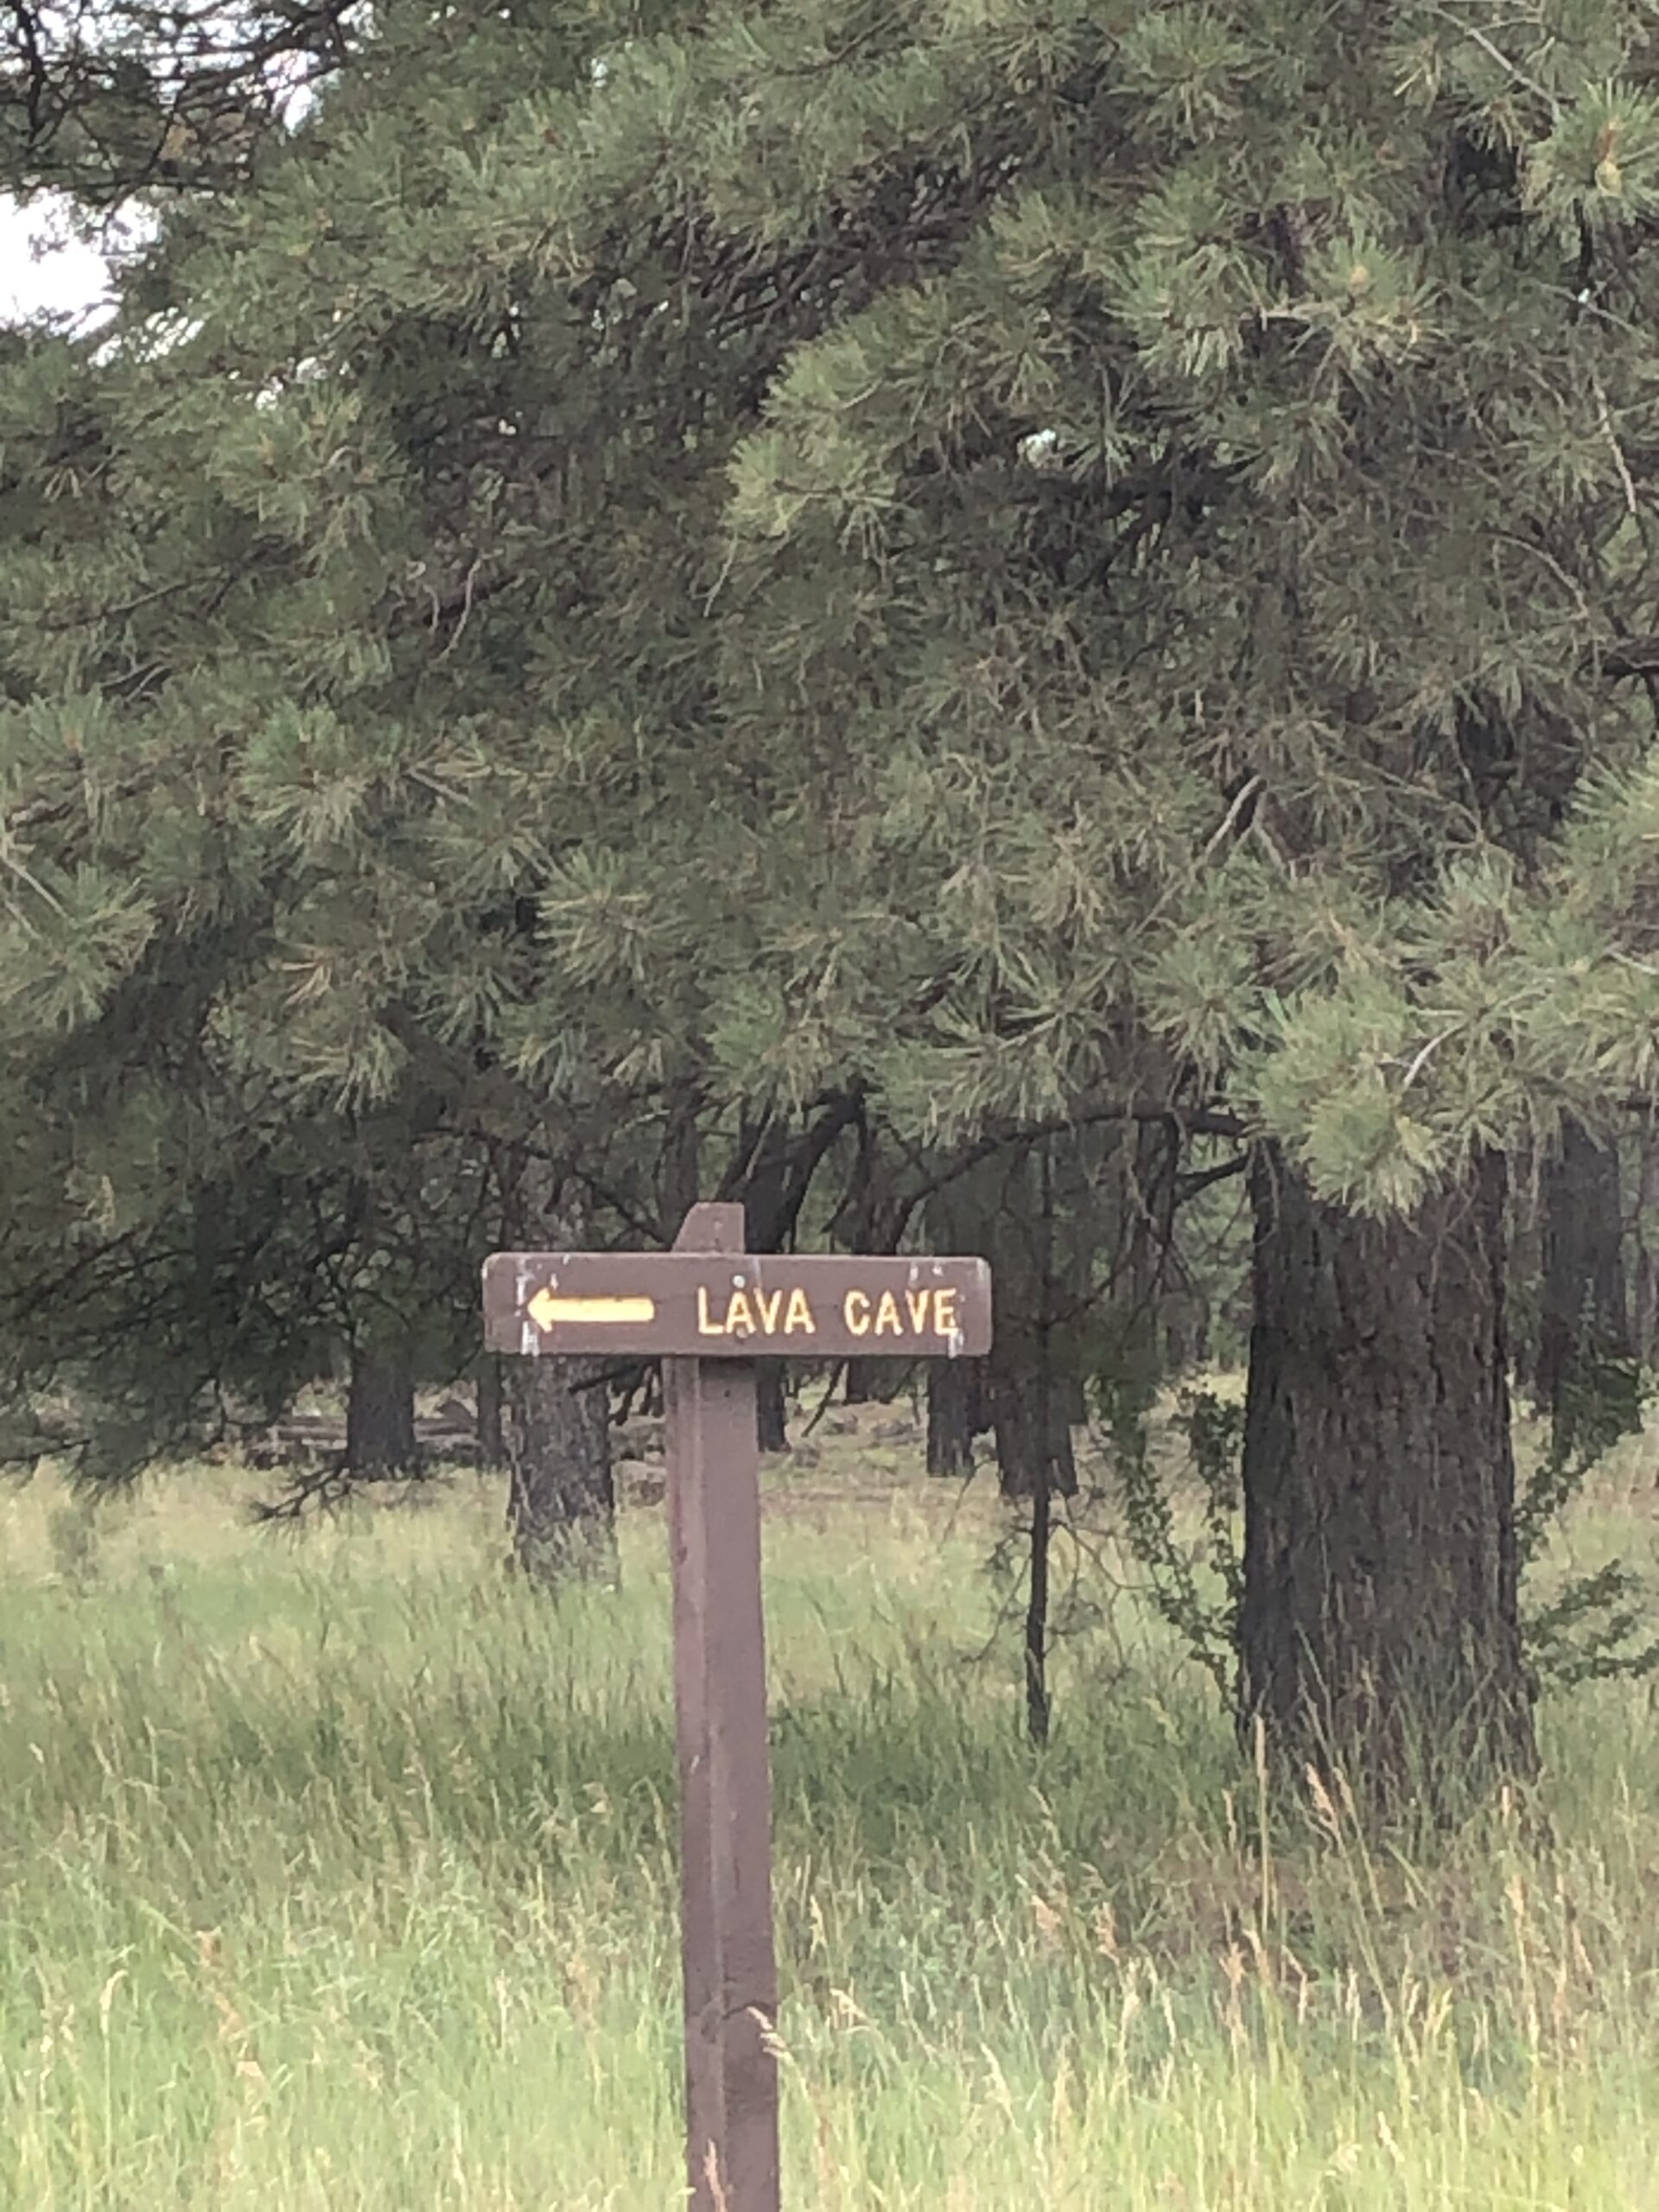 The Lava River Cave is just 30 minutes away from Flagstaff, Arizona. The cave itself was formed 700,000 years ago - at that time, molten lava erupted out of nearby Harts Prairie. The cave was founded in 1915 by lumbermen in the area.